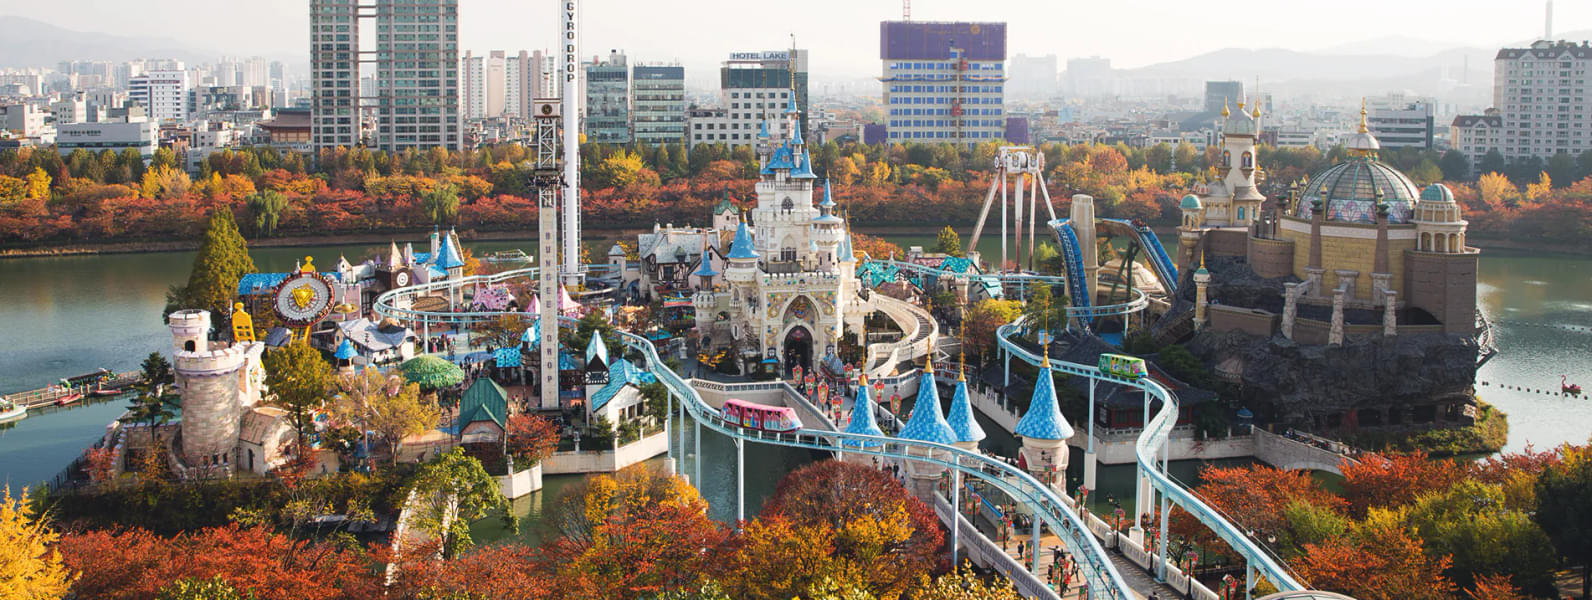 Lotte world tower tickets Seoul Image